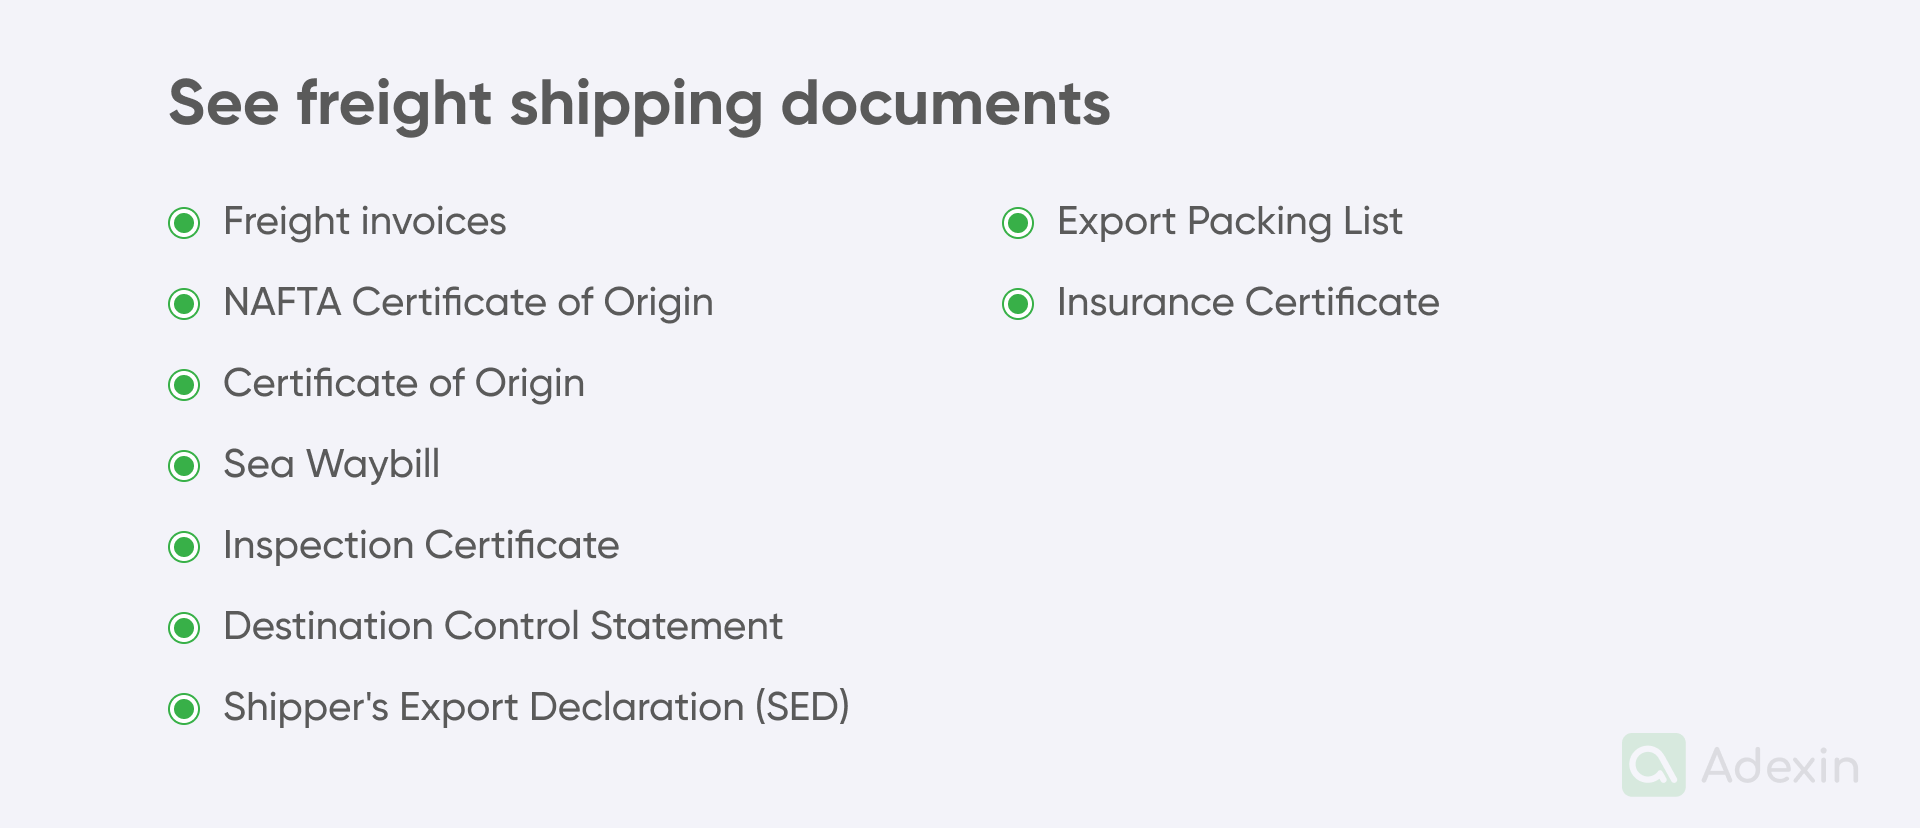 See freight shipping documents